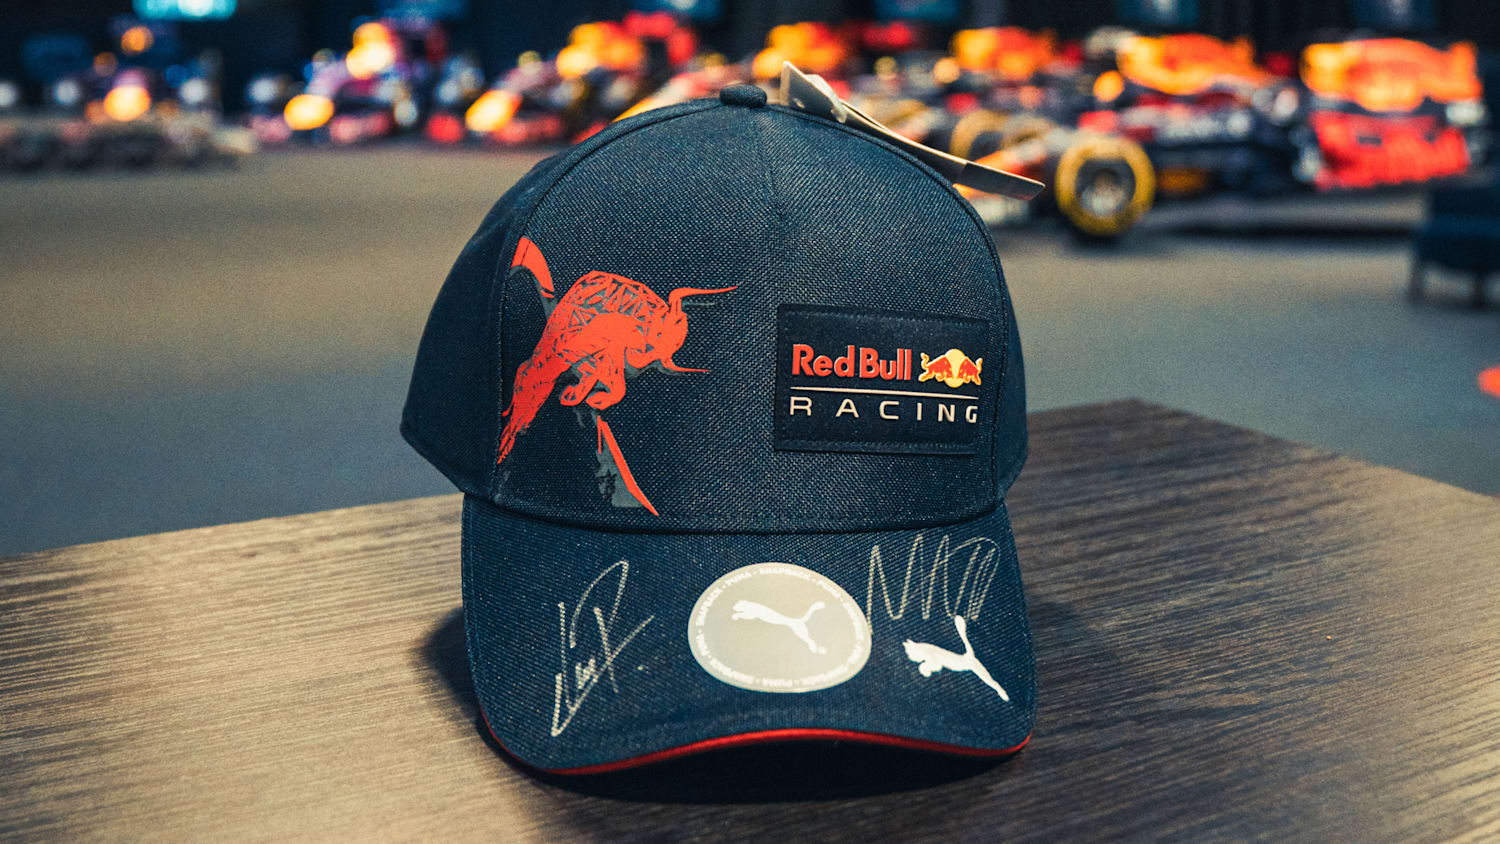 A Signed Oracle Red Bull Racing Team Cap